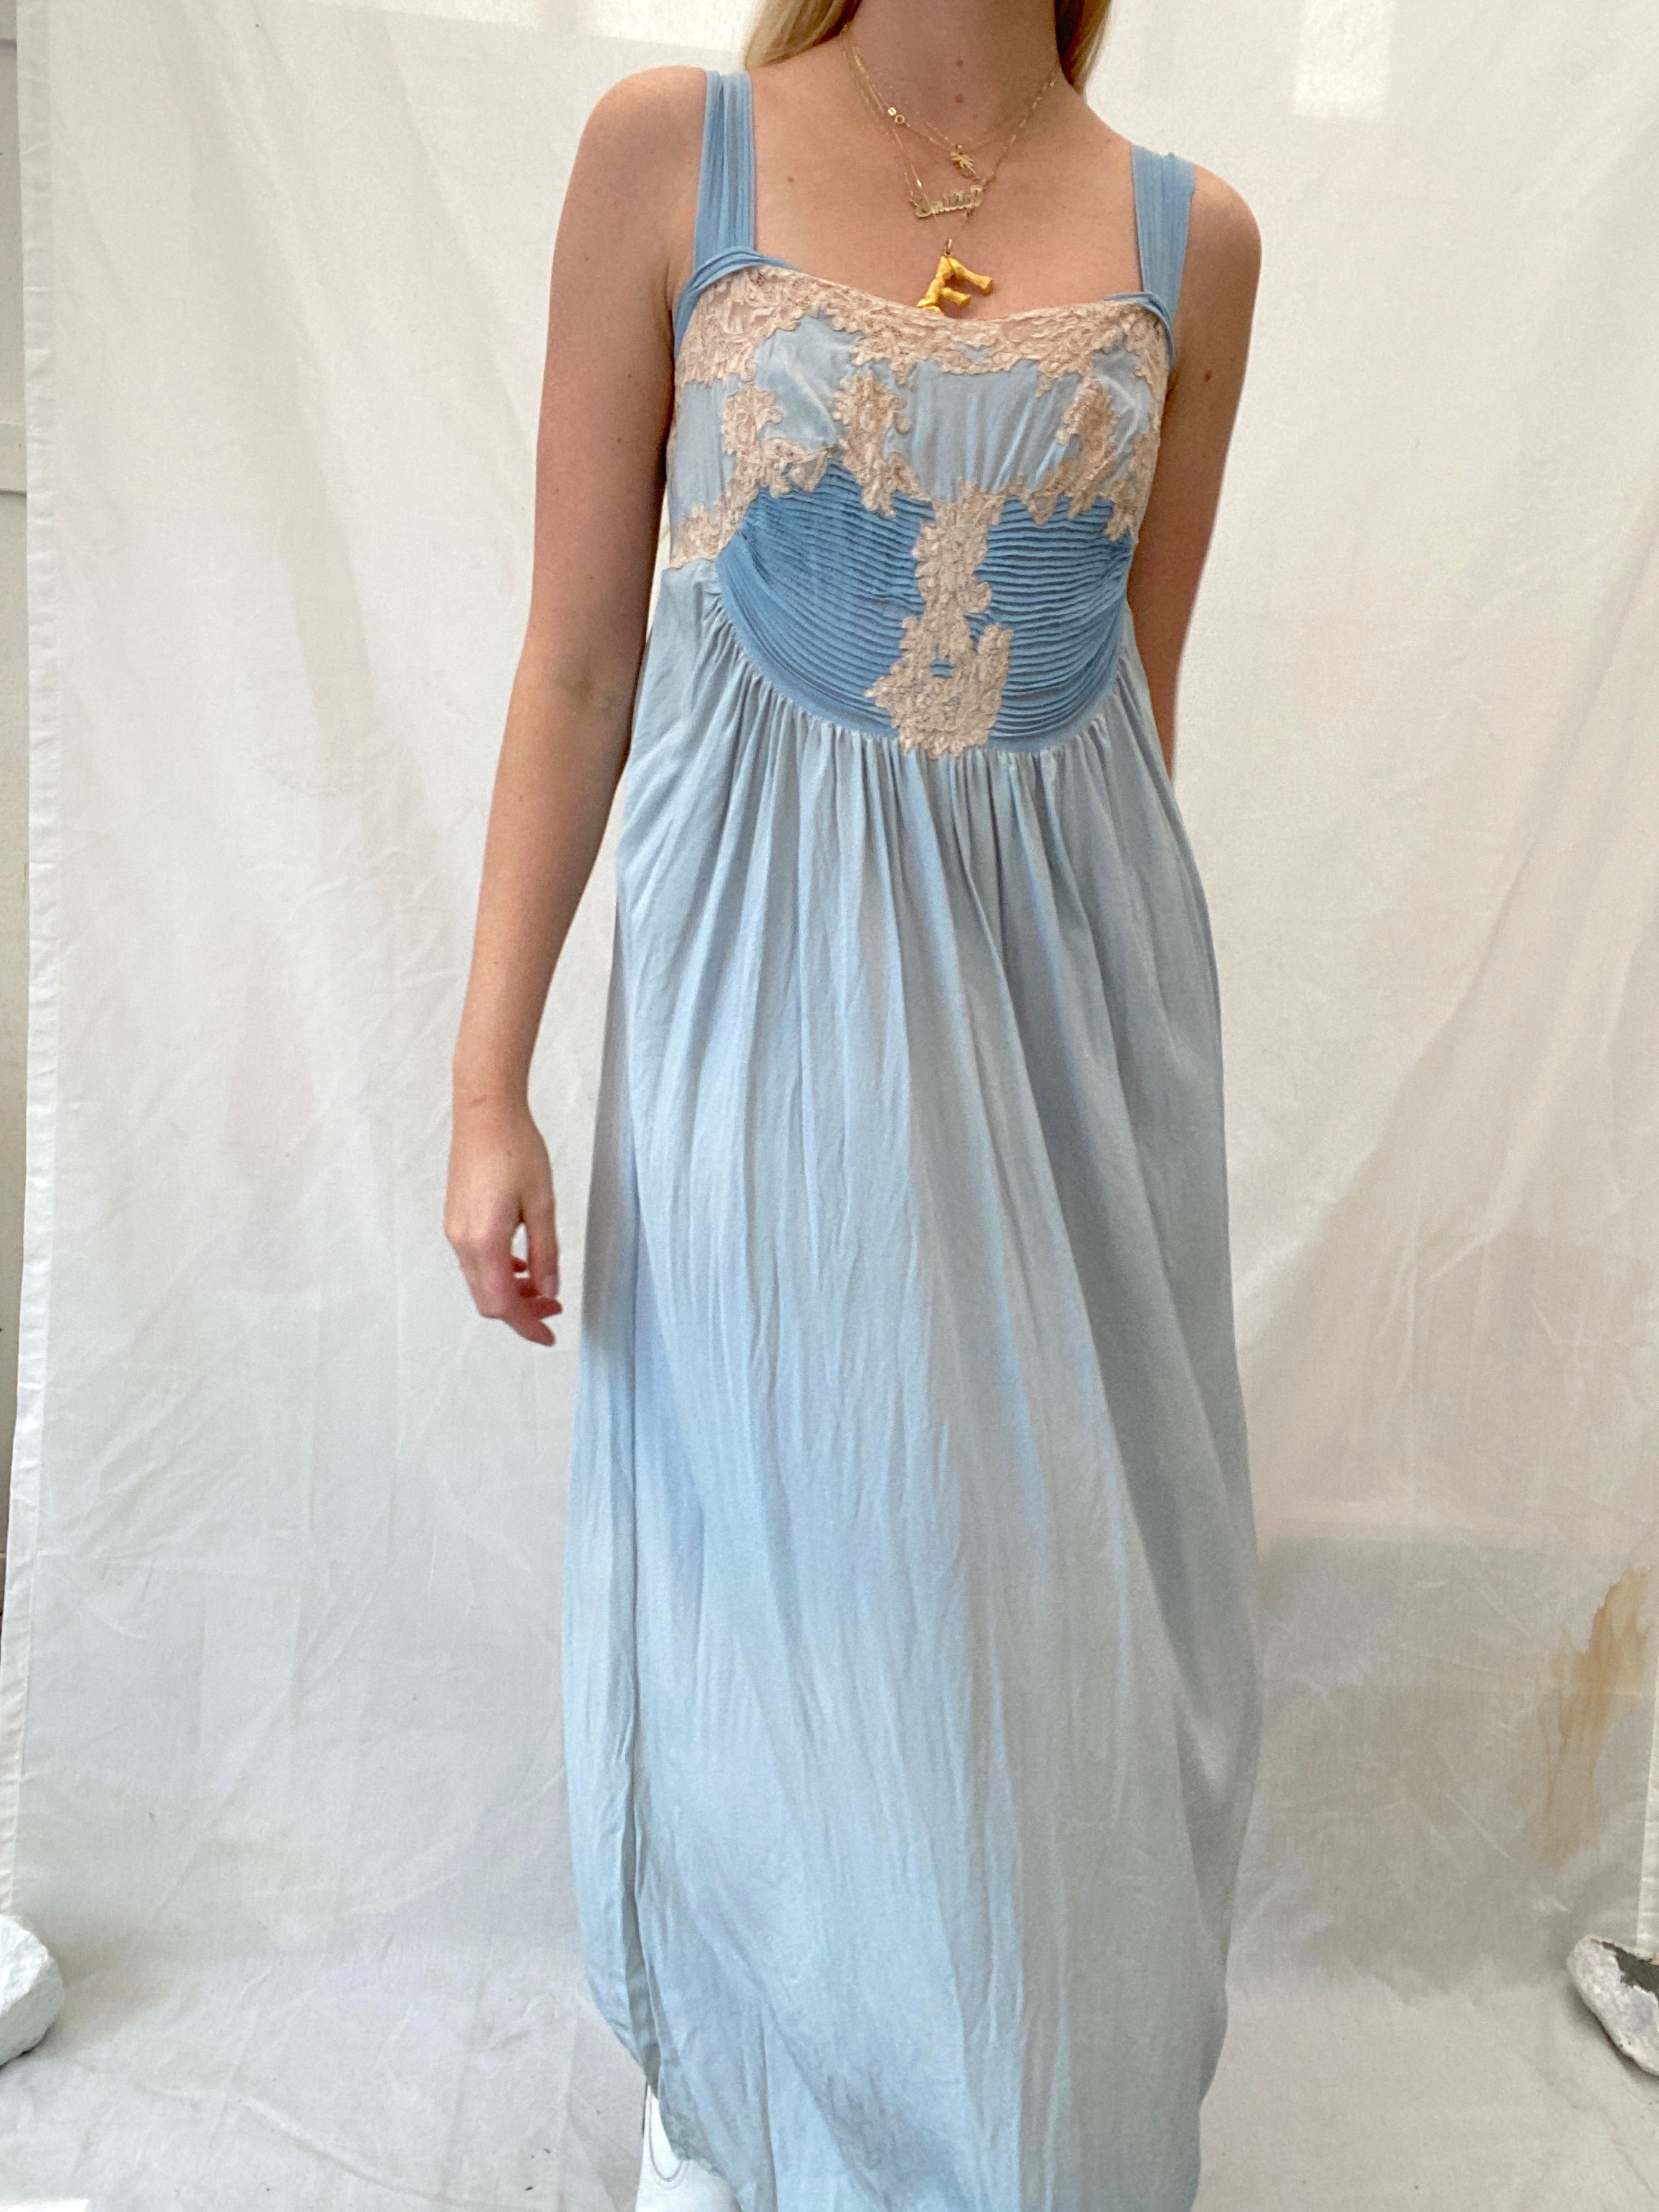 1920's Sky Blue Hand Stitched Slip with Cream Lace